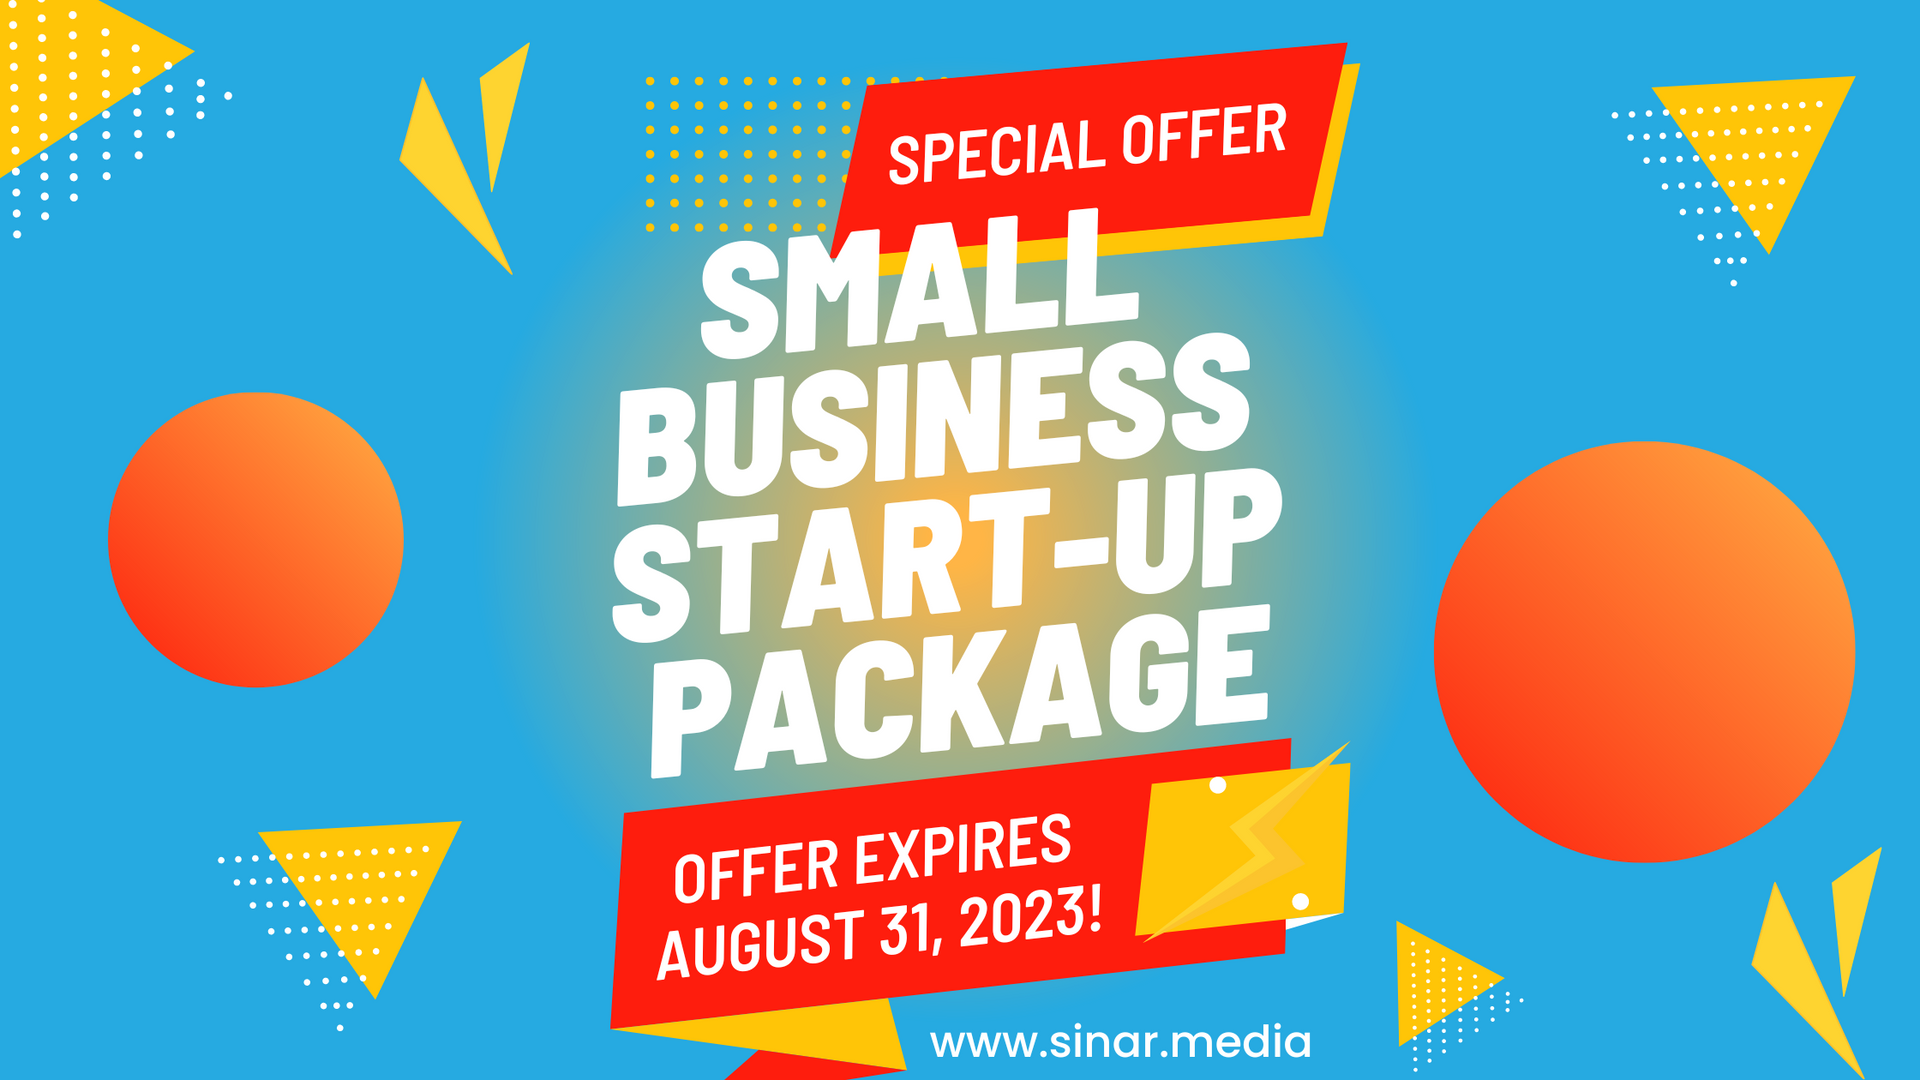 Special Offer for Small Business Start-Up Package